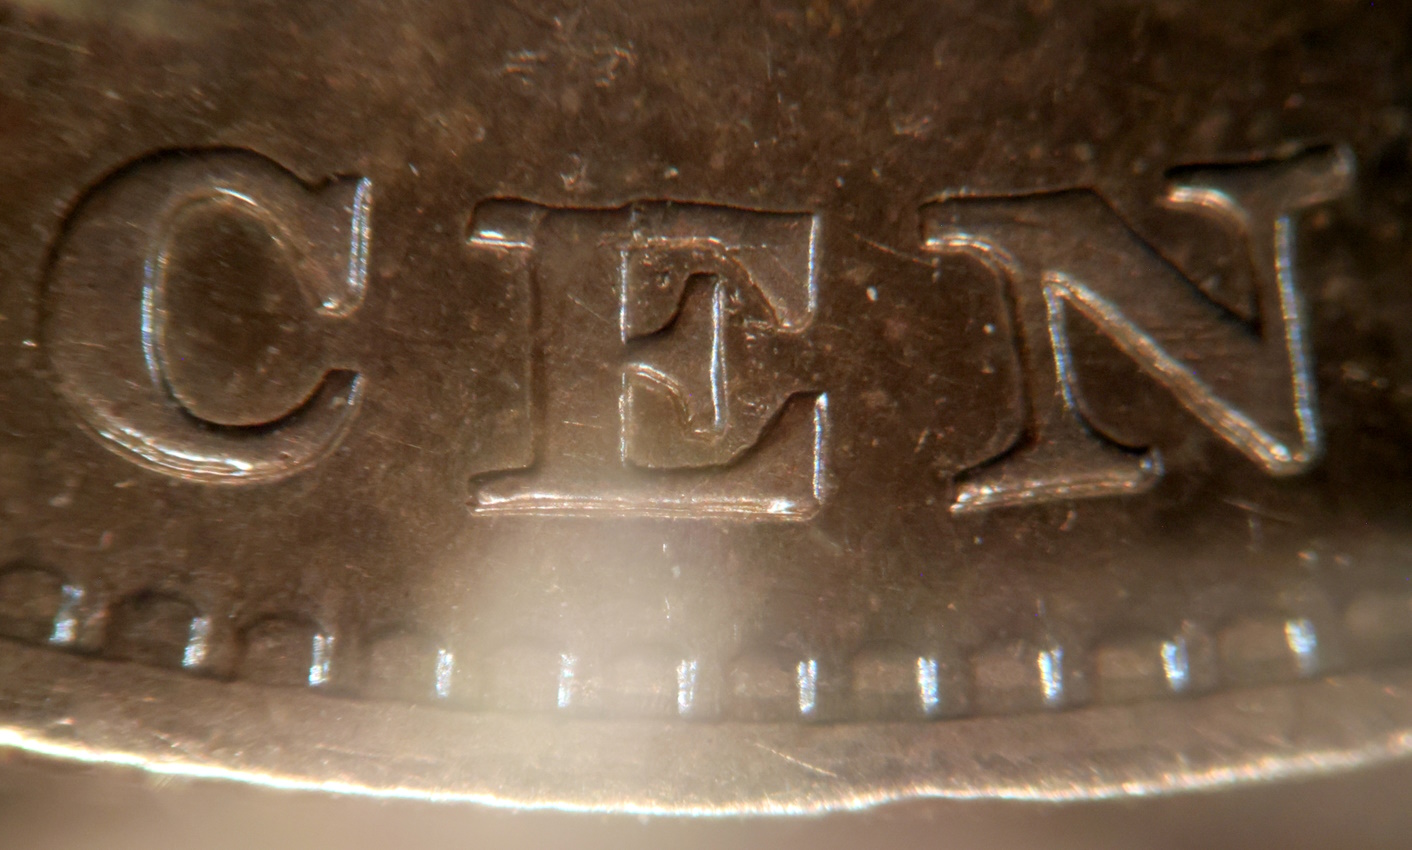 CEN of CENTS